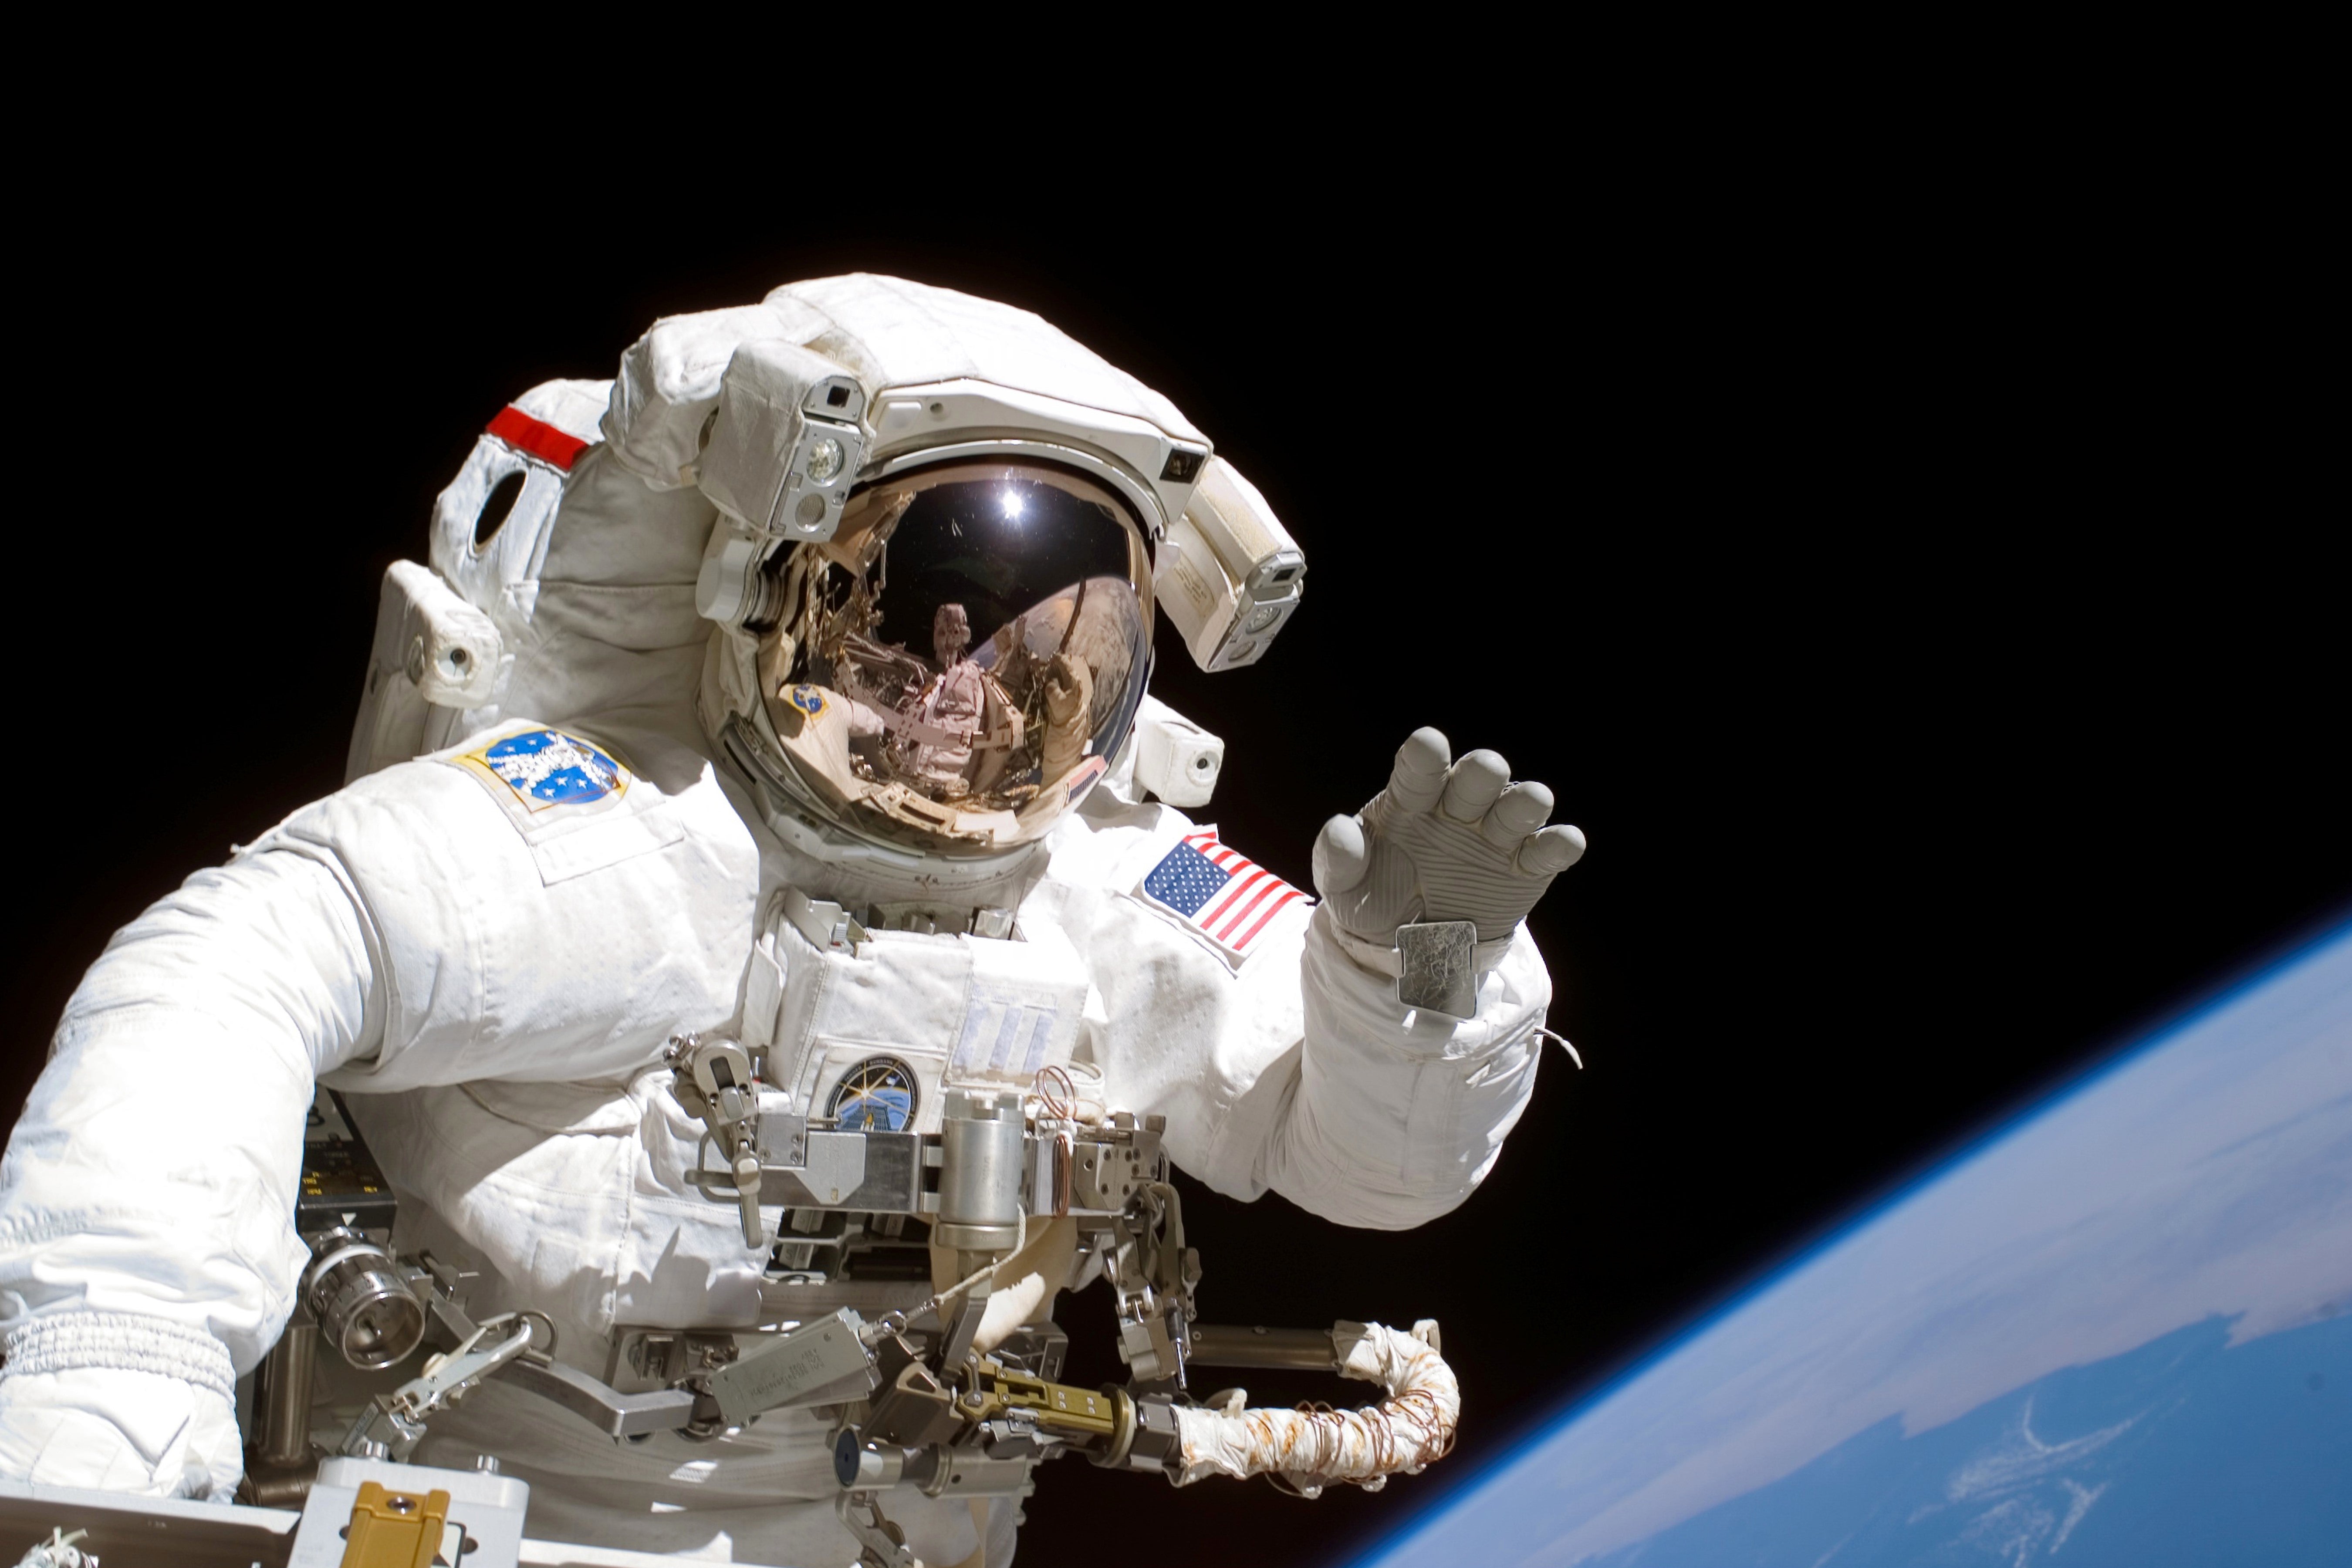 American astronaut Joseph Tanner on a space walk at the International Space Station in September 2006